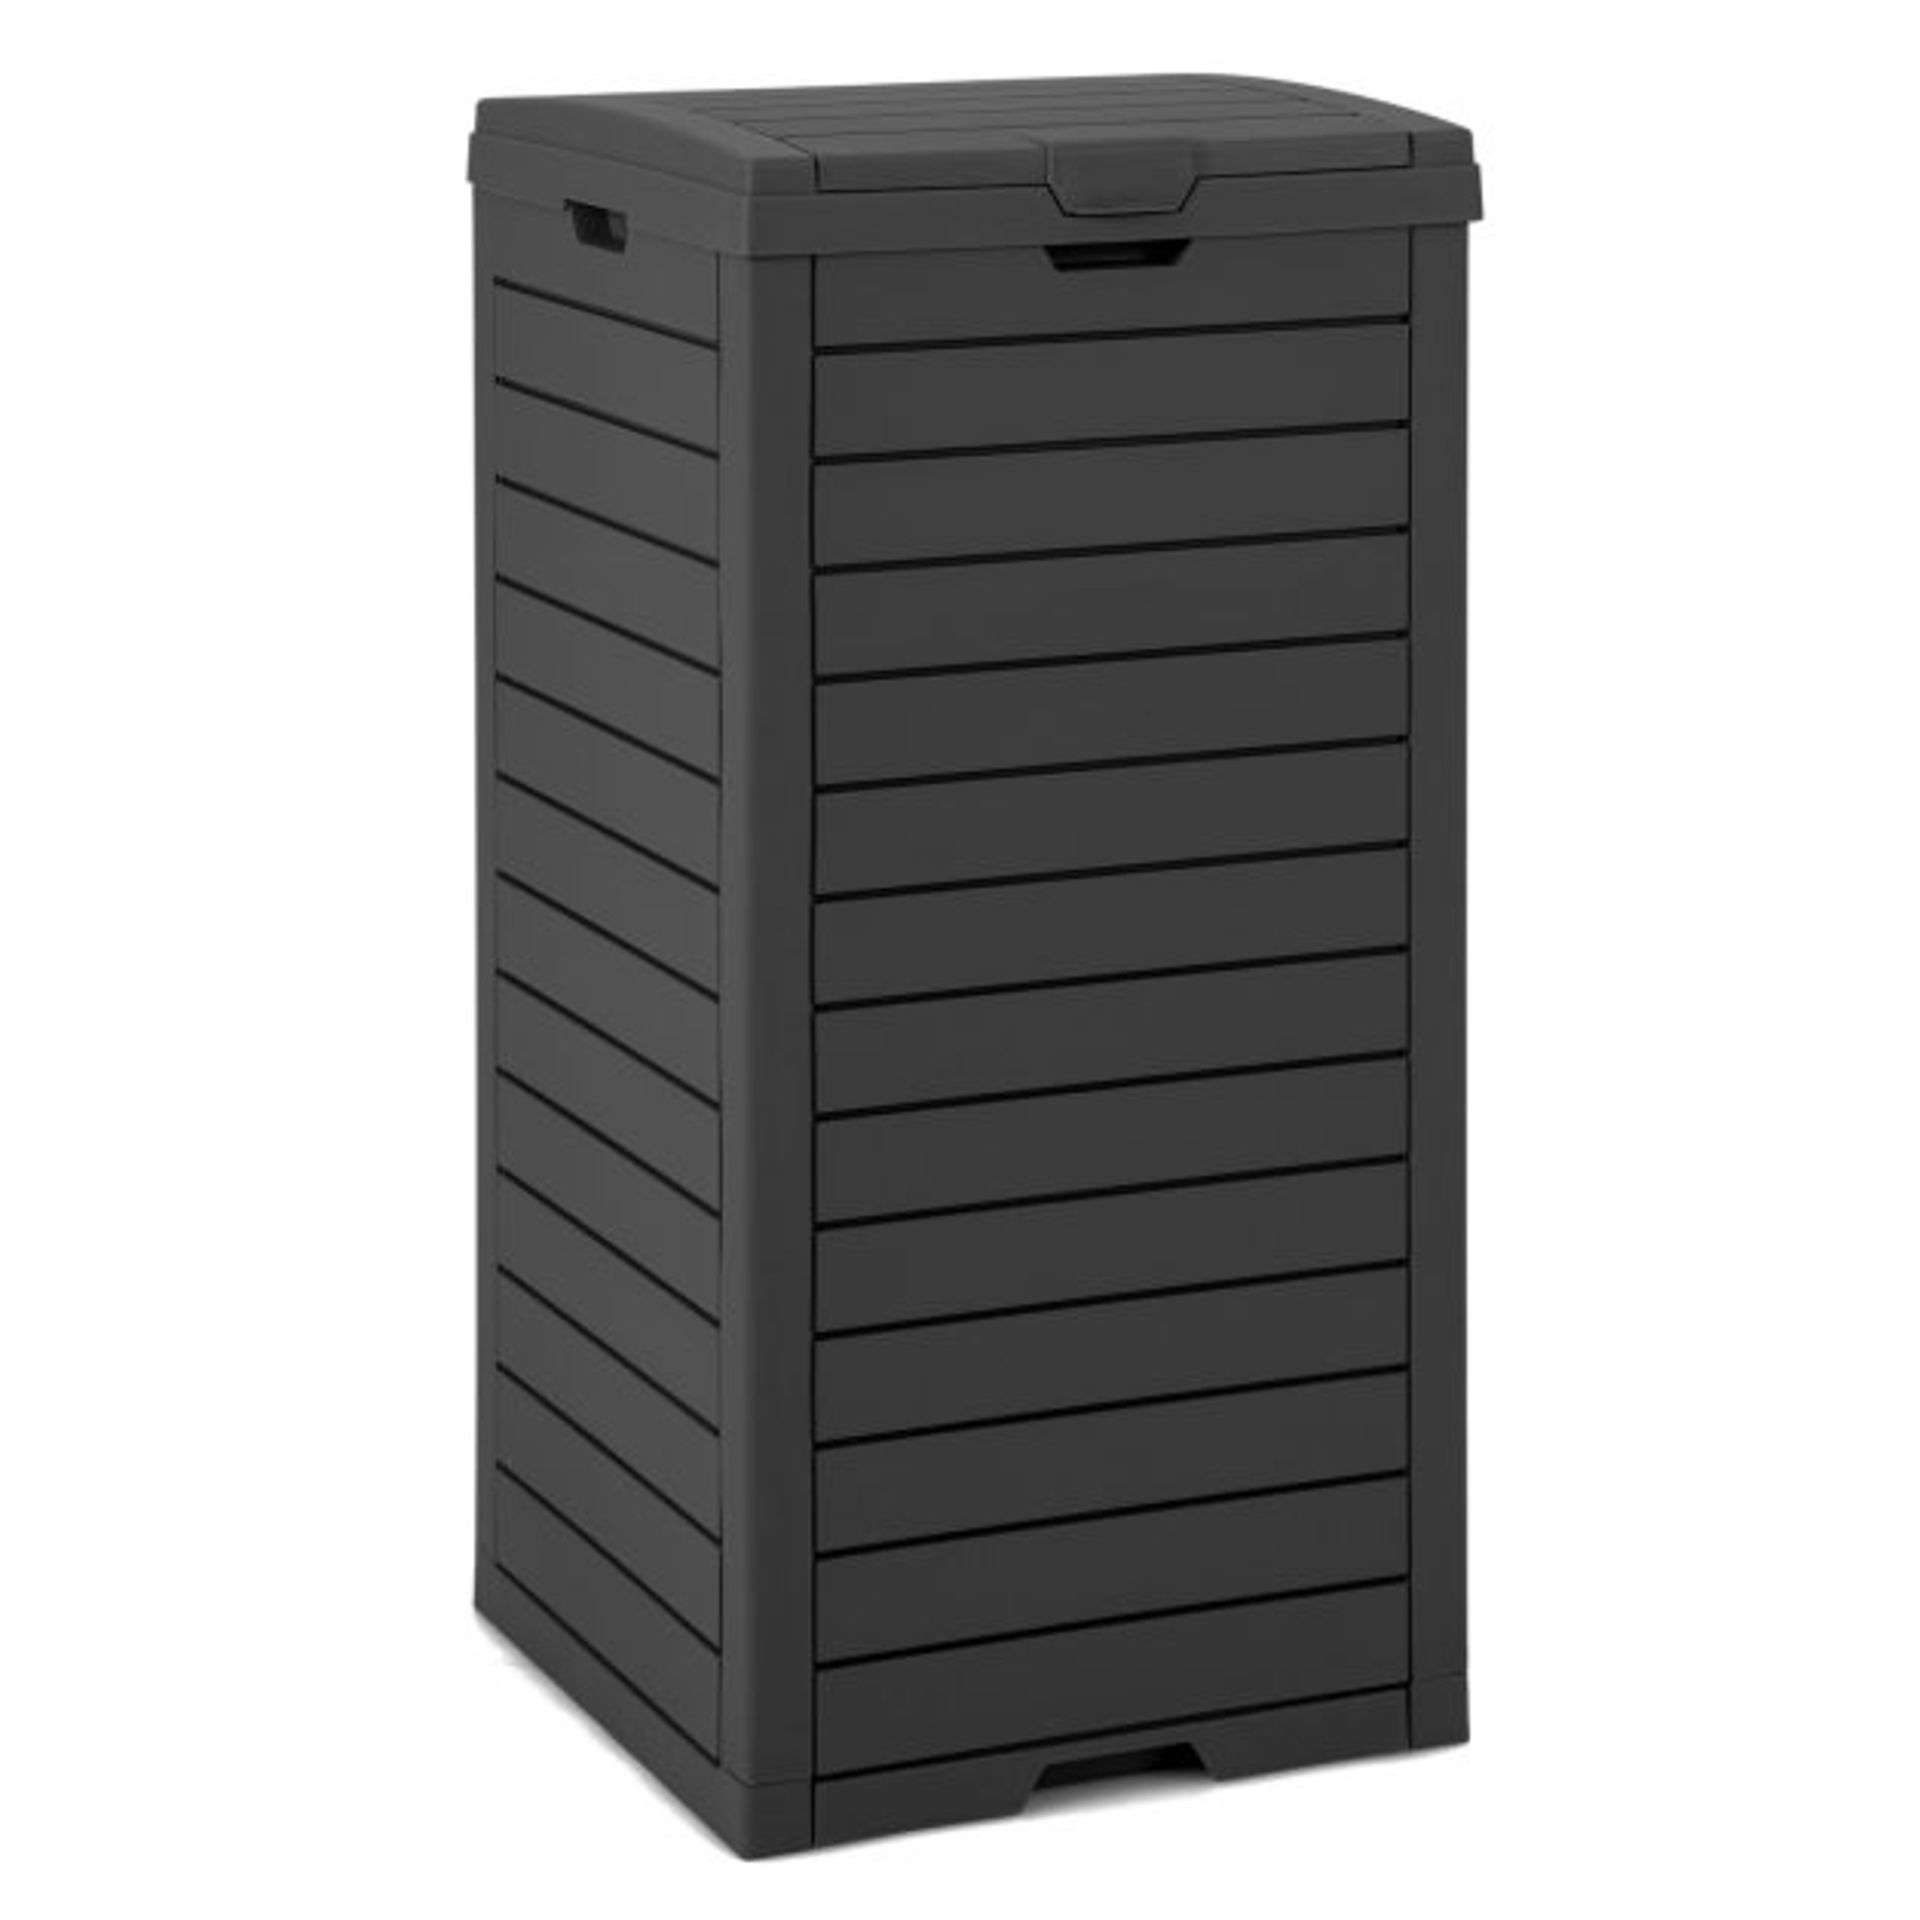 d117.5 L Gallon Large Trash Bin with Lid and Pull-out Liquid Tray for Backyard. - SR36. Are you